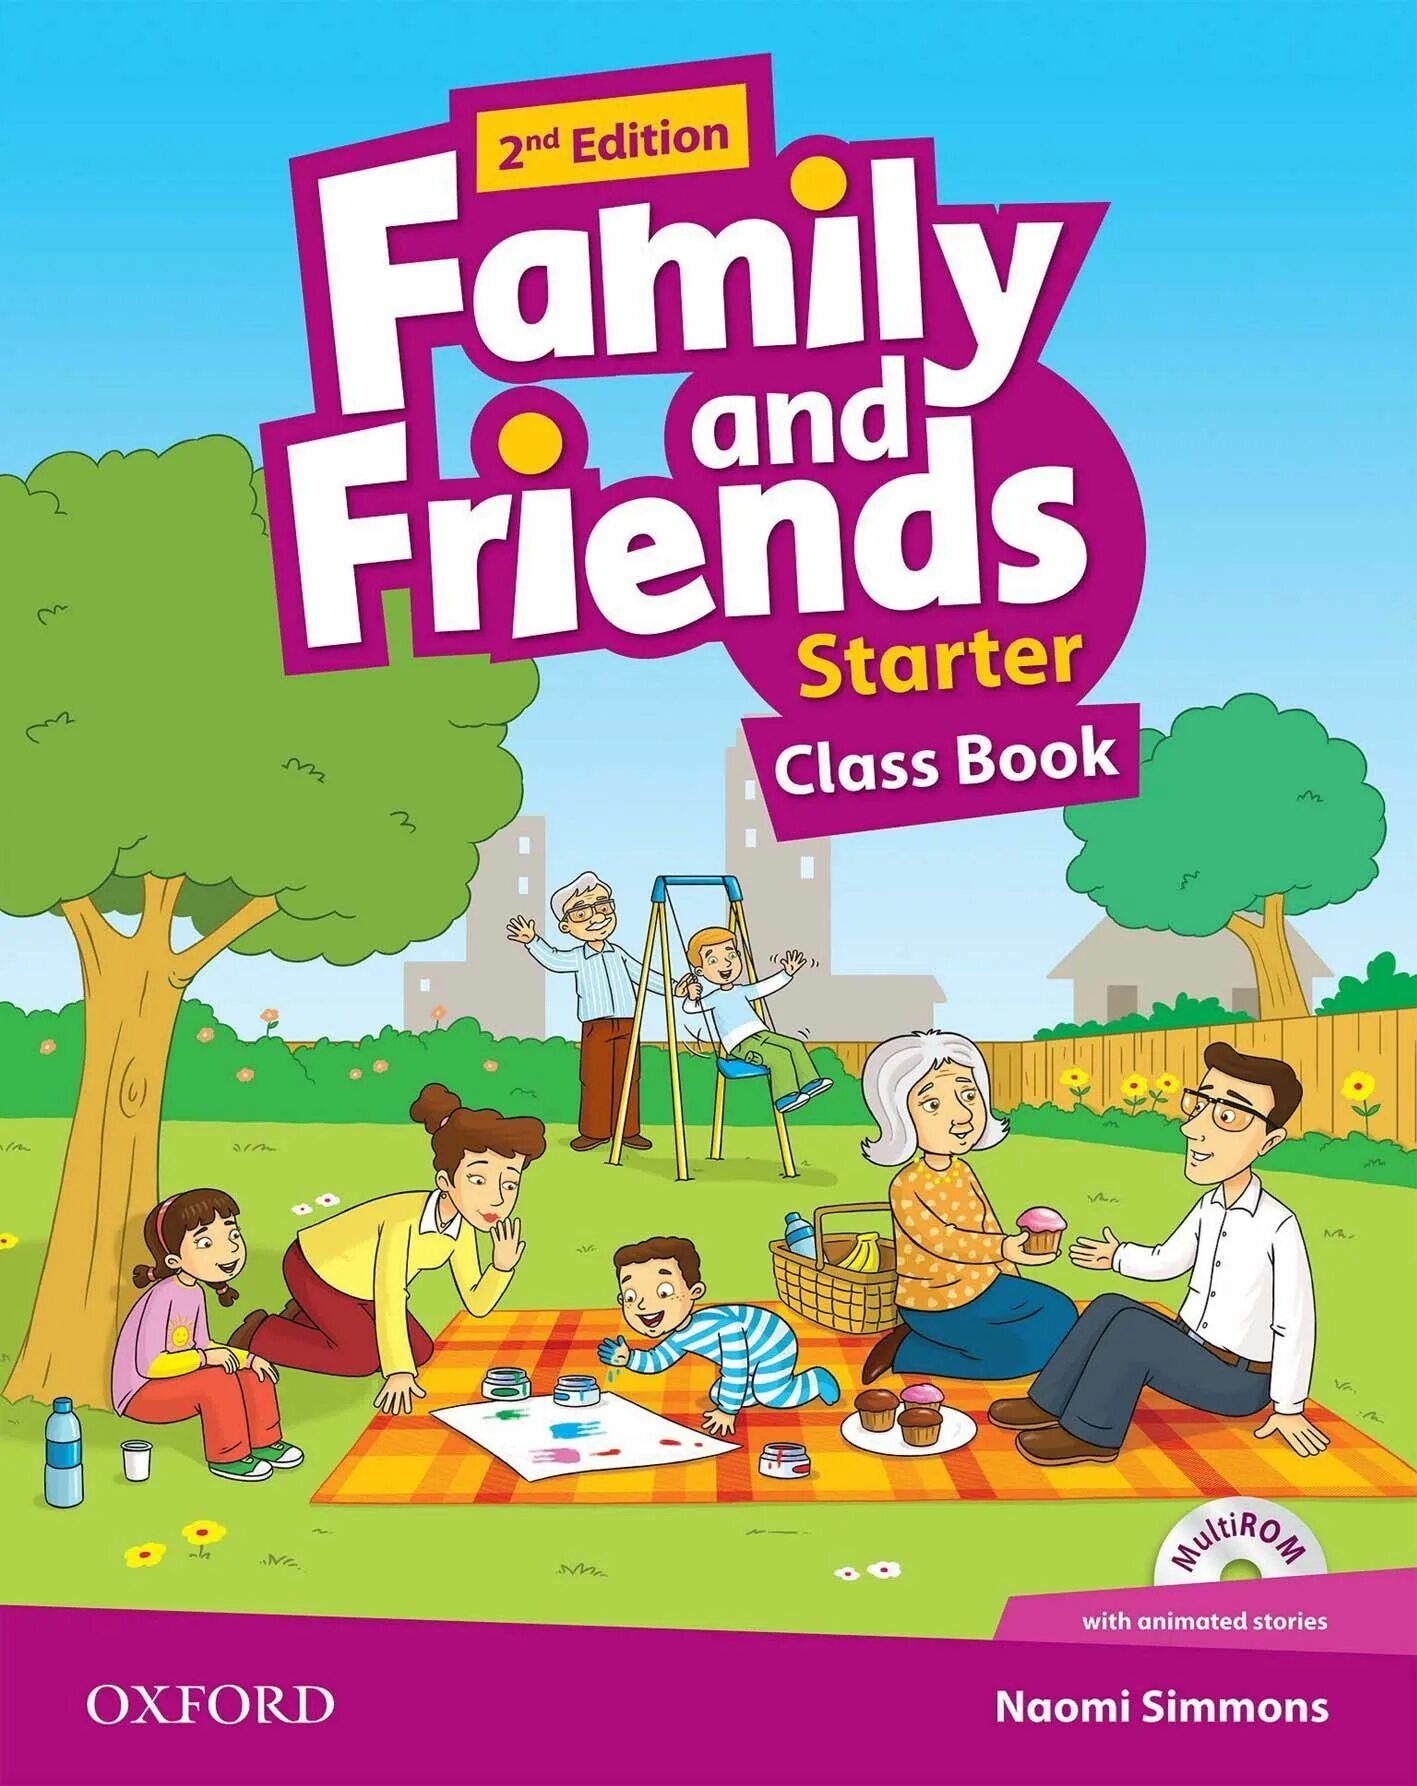 Family and friends 2 Edition Classbook. Family and friends 2 class book Starter. Учебник Oxford Family and friends 2. Английский язык Family and friends class book Naomi Simmons 1.